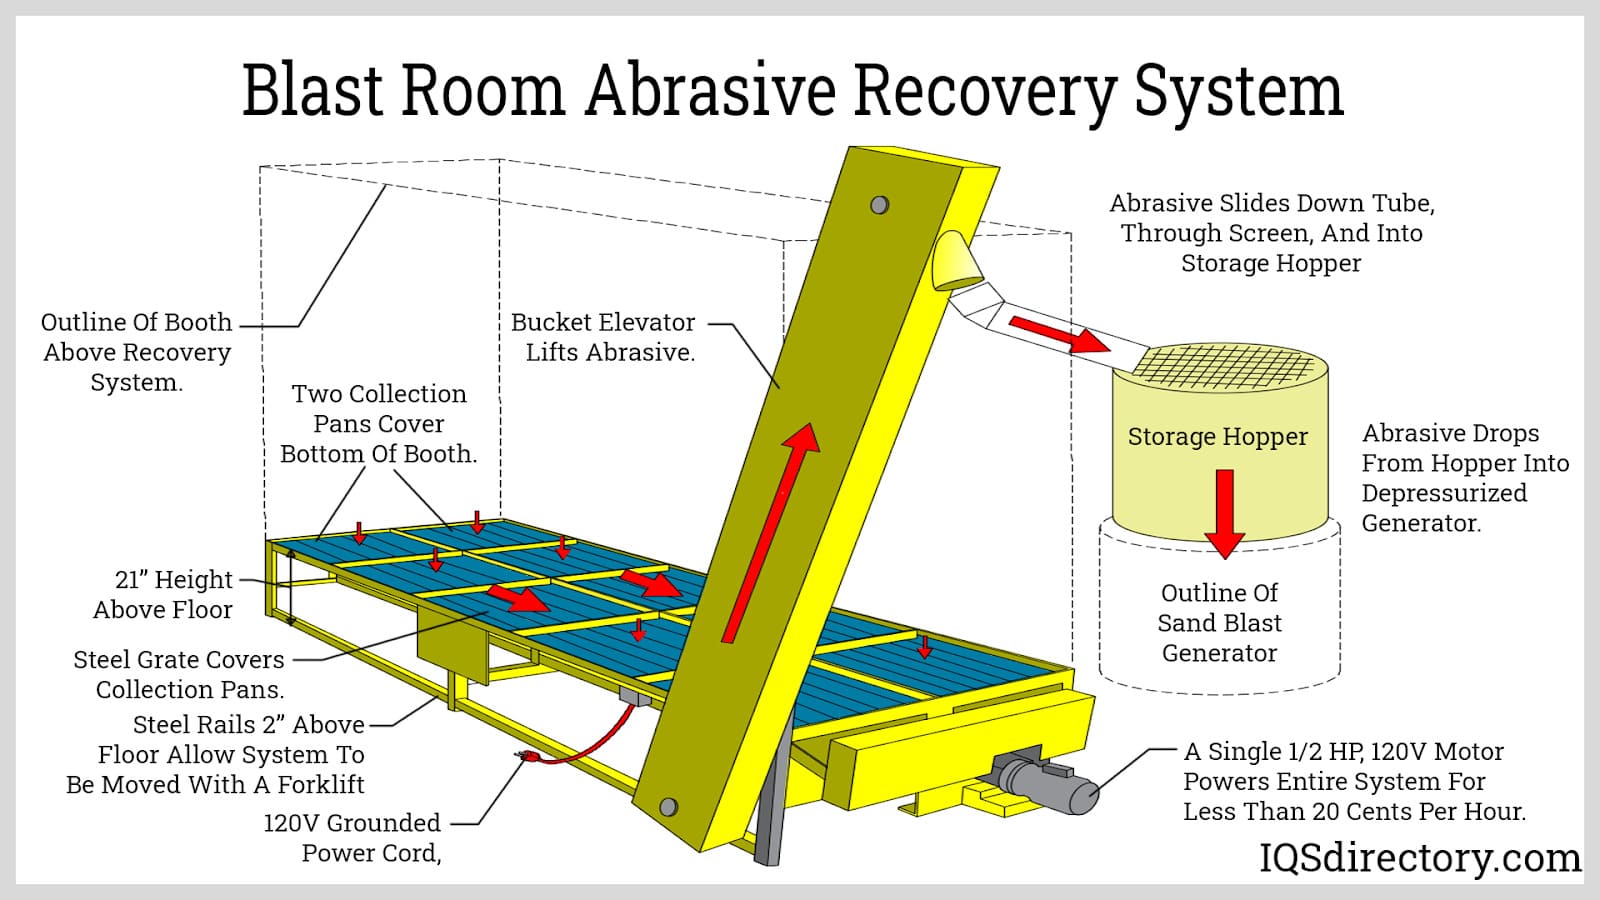 Blast Room Abrasive Recovery System